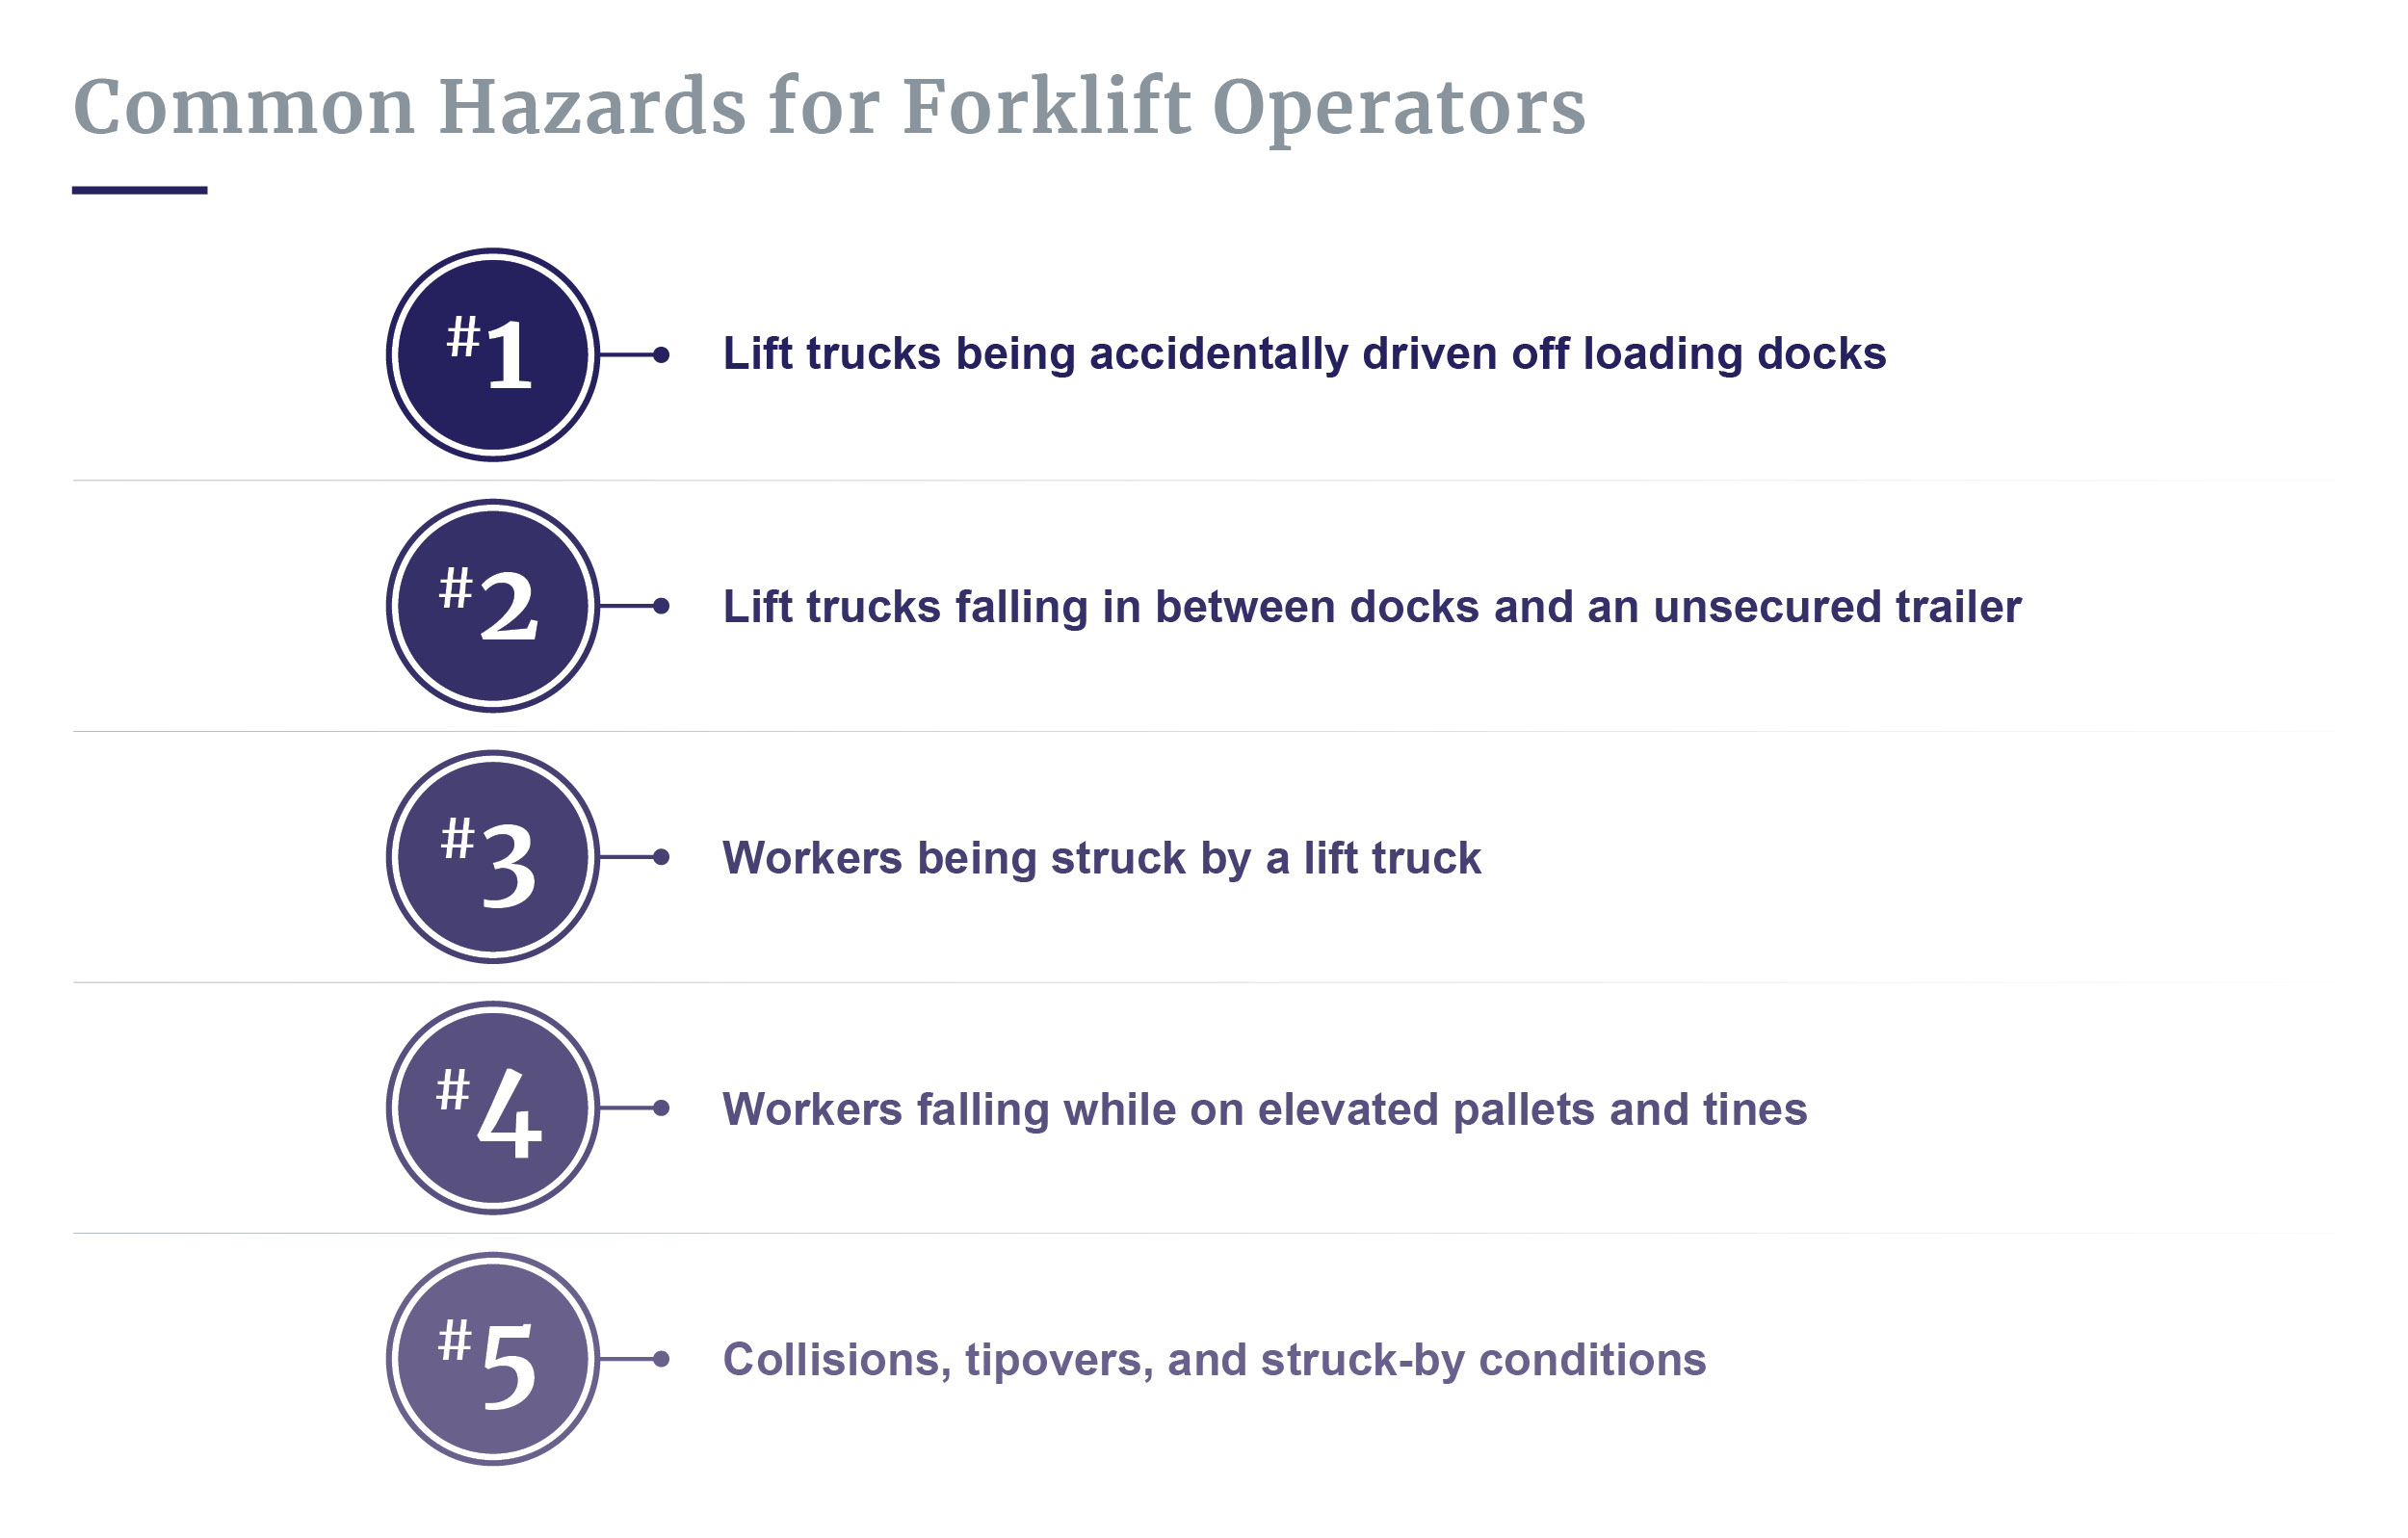 Common hazards for forklift workers